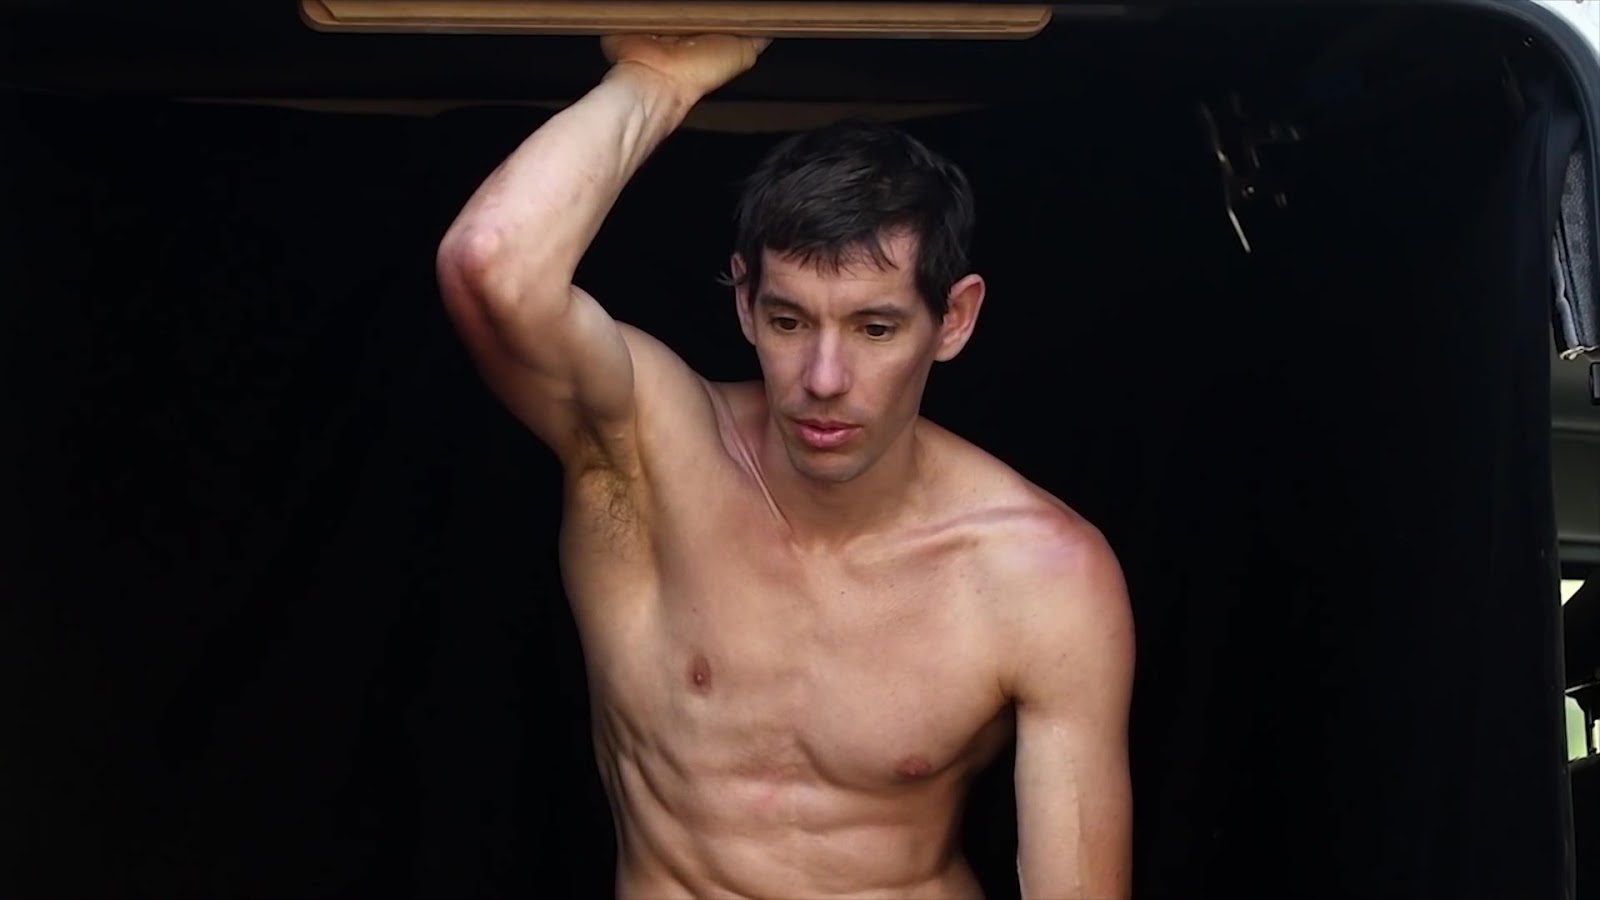 Alex Honnold nude in ESPN Body Issue 2019 behind the scenes.